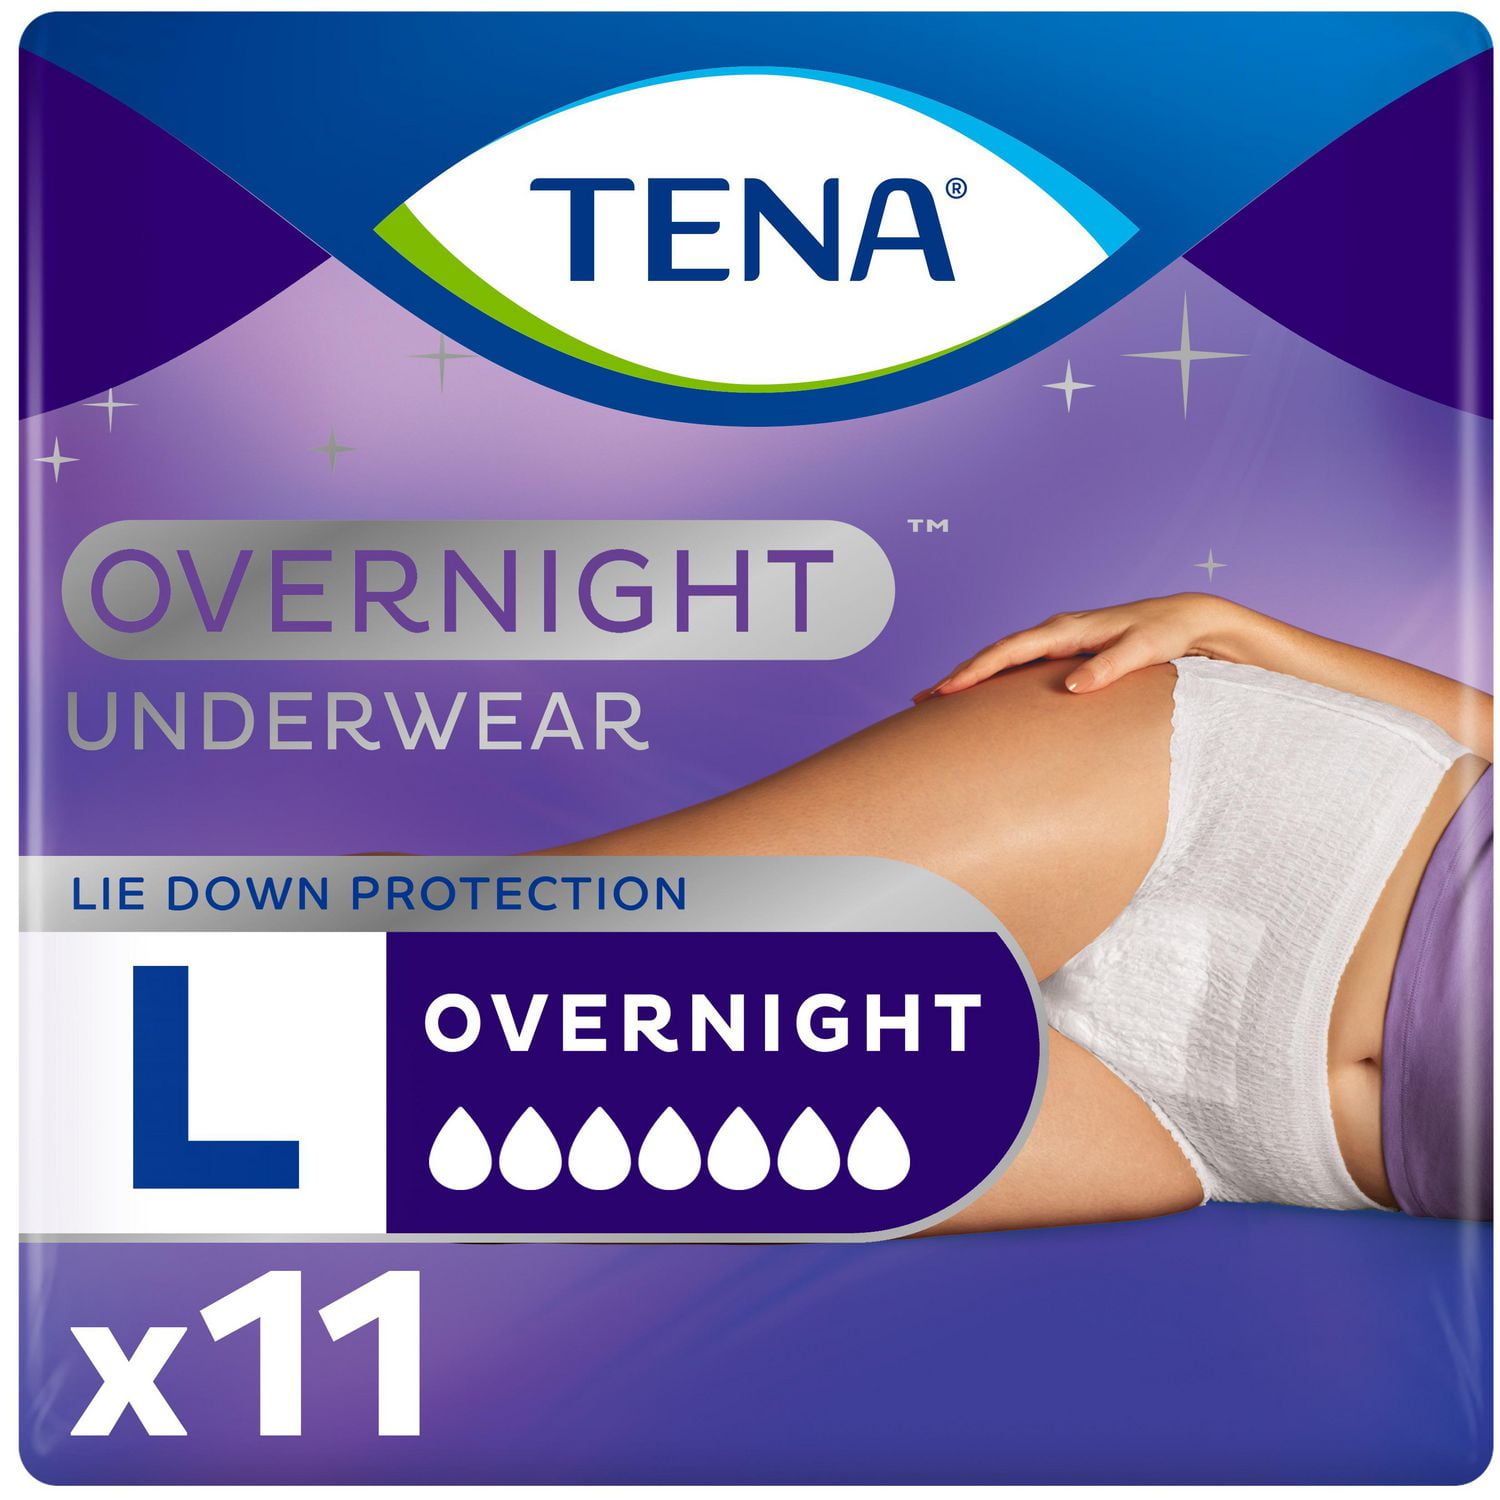 FREE TENA Stylish Incontinence Underwear Sample Kits for Women (Account  Required)